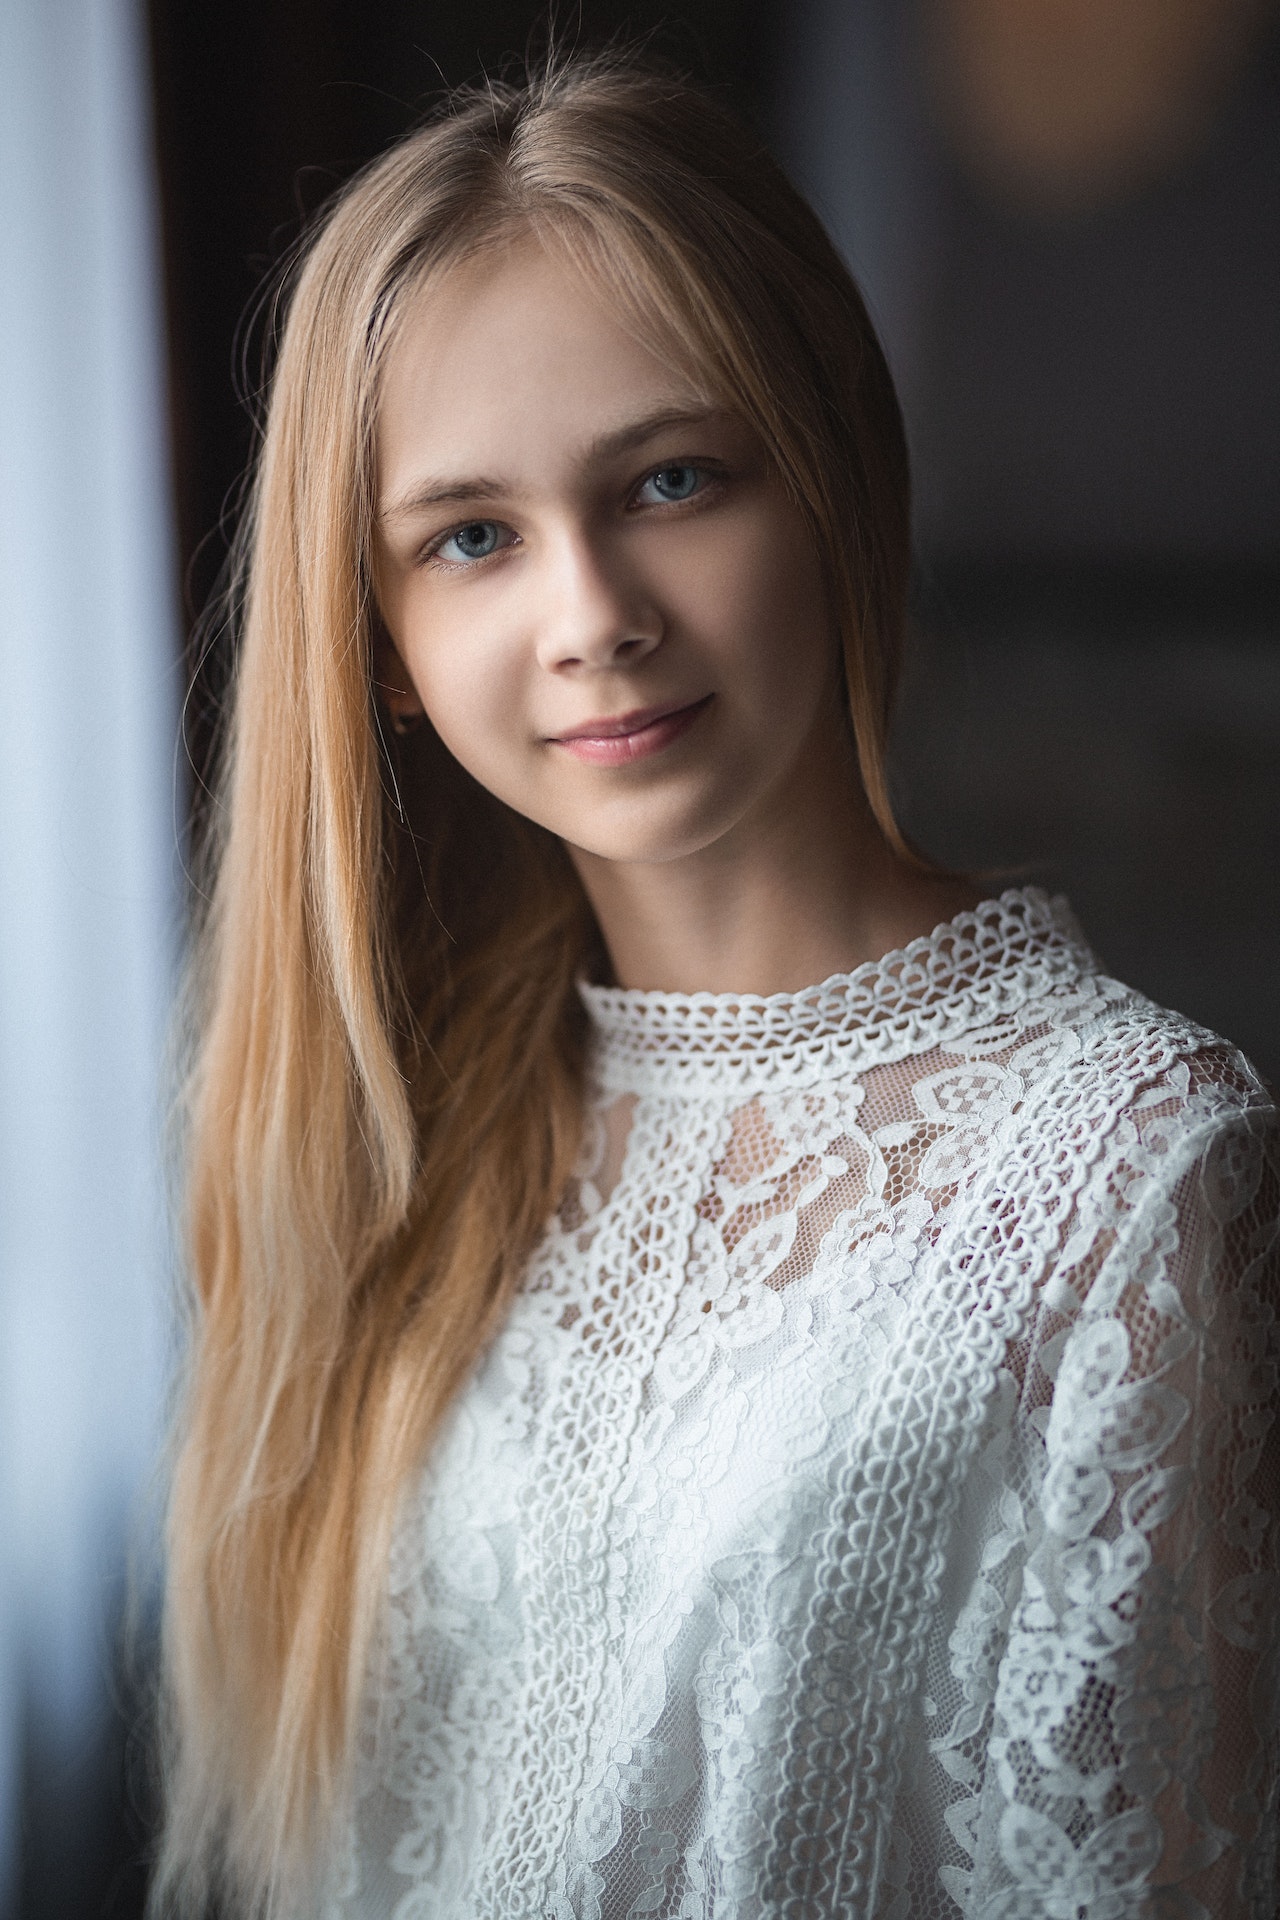 Photo of Caucasian teen girl with blond hair smiling slightly and wearing a lace blouse. Photo could represent the happiness she feels over having less anxiety due to online solution focused brief therapy in Illinois or Florida.